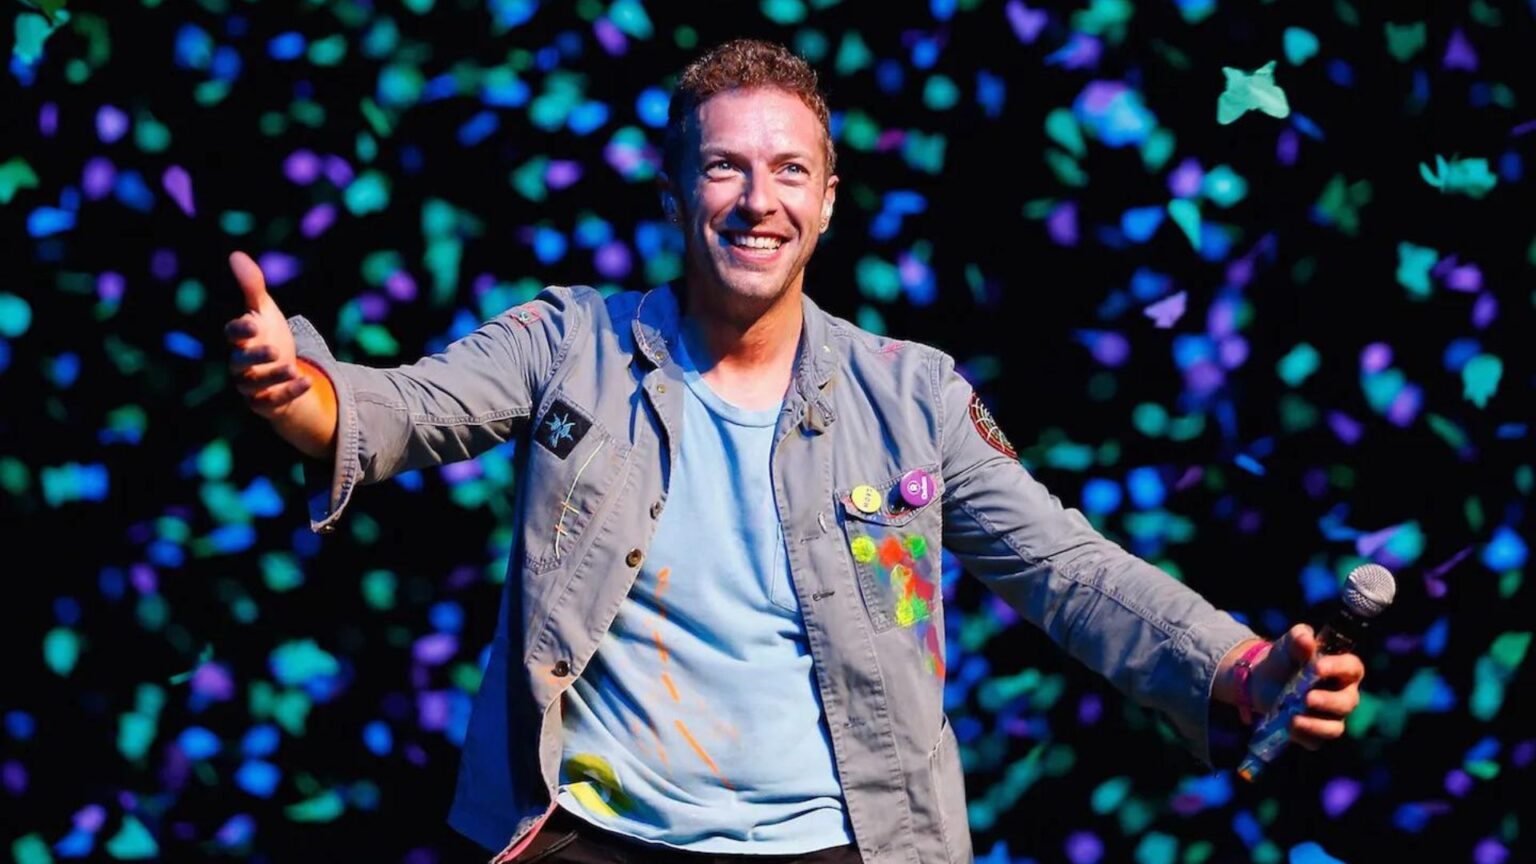 'It's my distant dream' says Chris Martin on becoming star